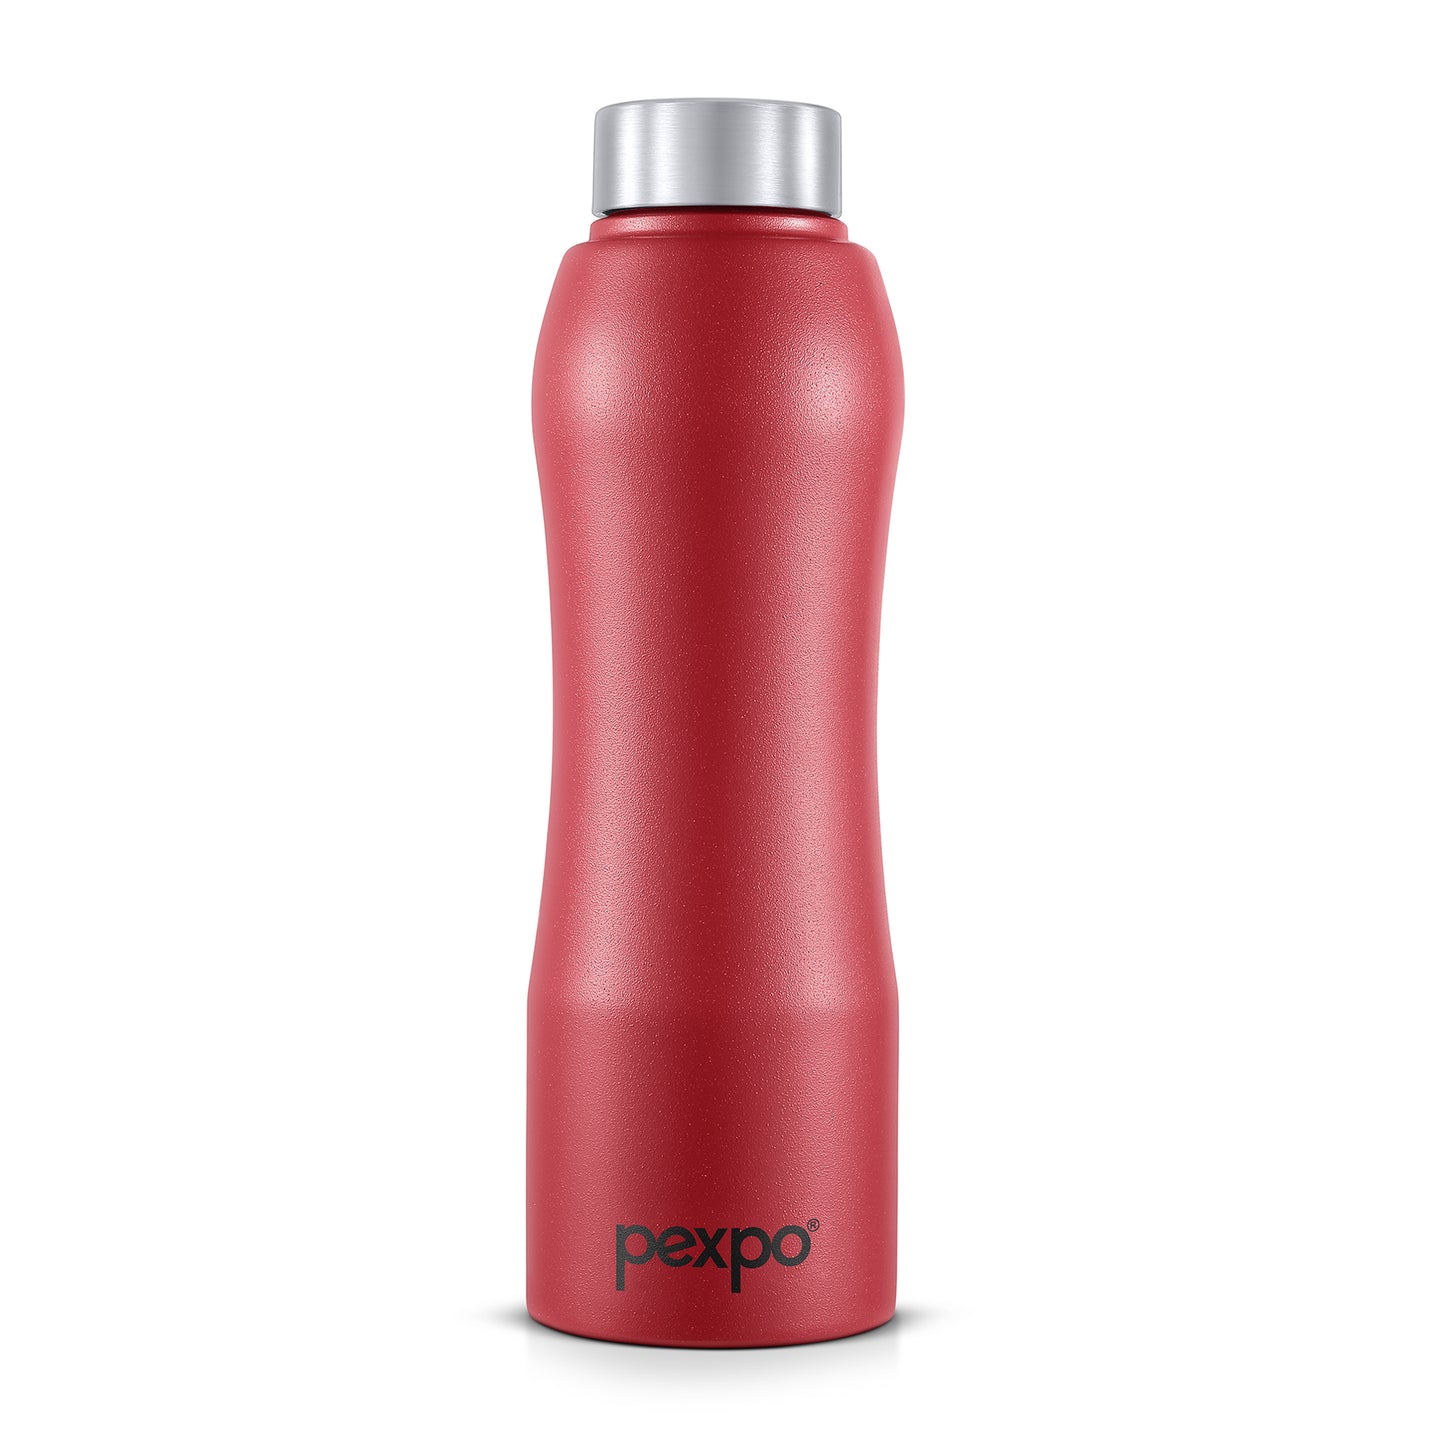 PEXPO Bistro- Wide Mouth & Leak-Proof Stainless Steel Water Bottle with Sipper Cap